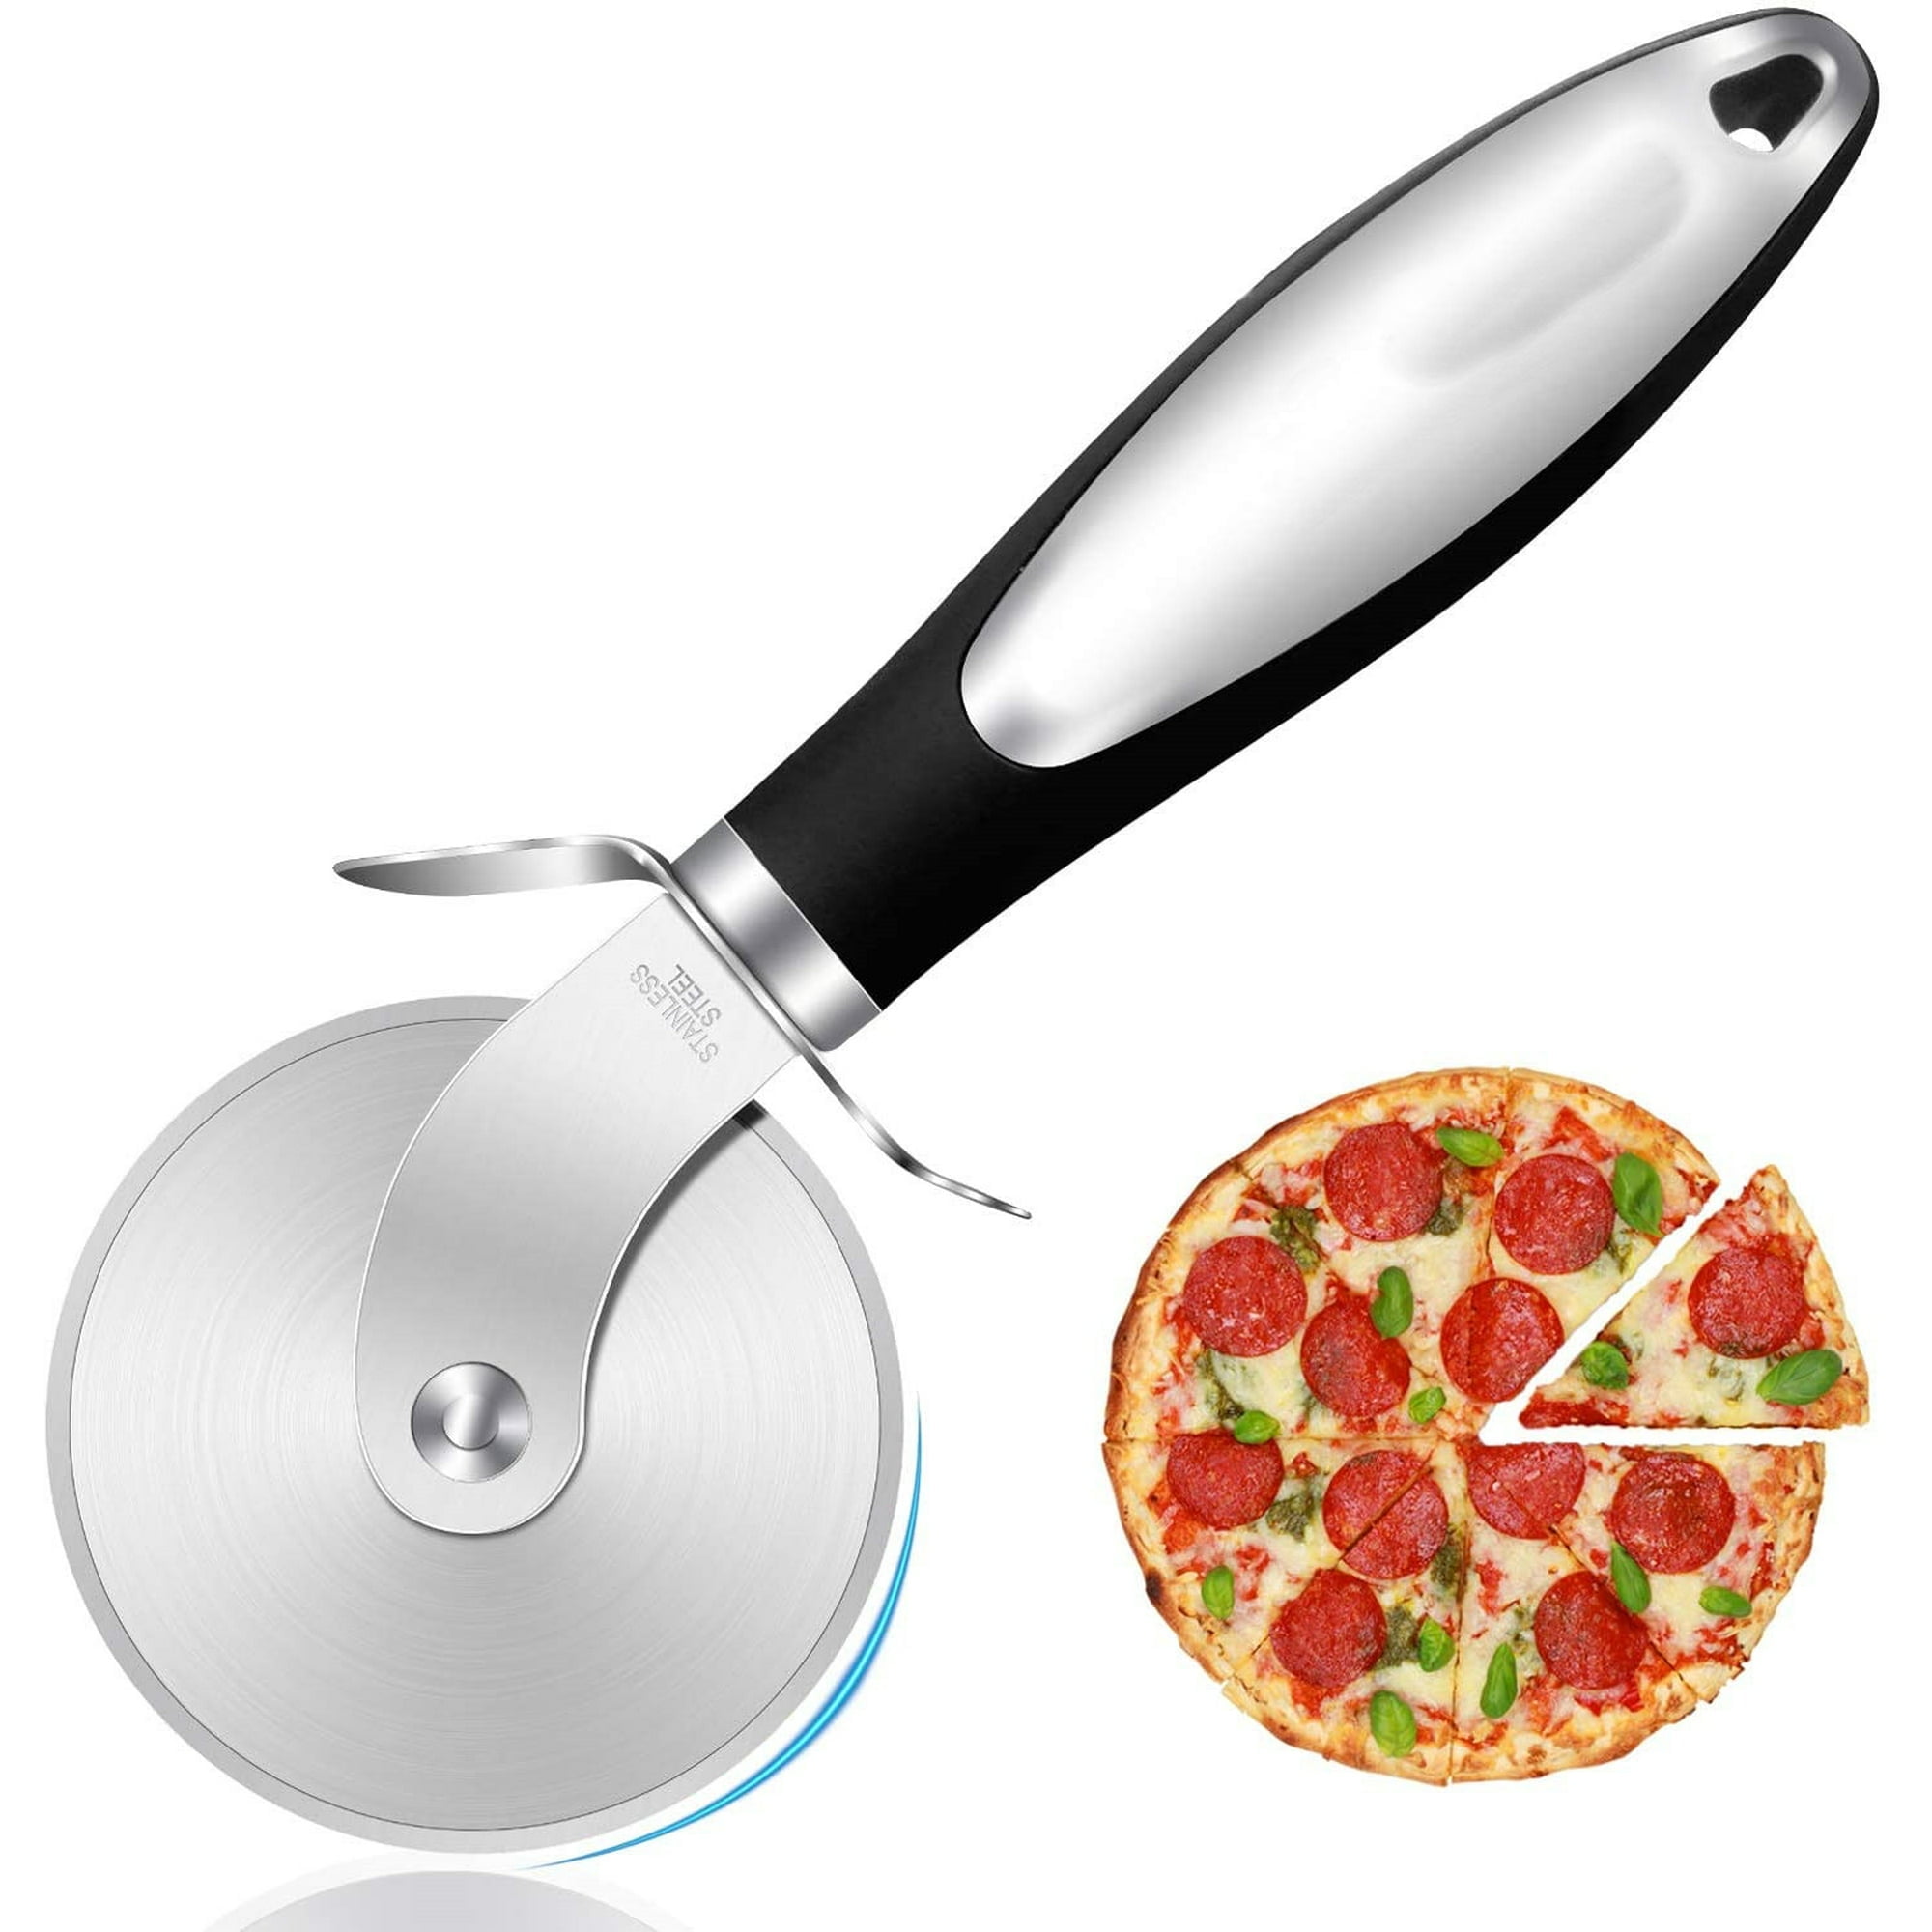 Dreamfarm Scizza | Non-Stick Pizza Scissors with Protective Server |  Stainless Steel | All-In-One Pizza Slicer | Easy-To-Use & Easy-To-Clean  Pizza